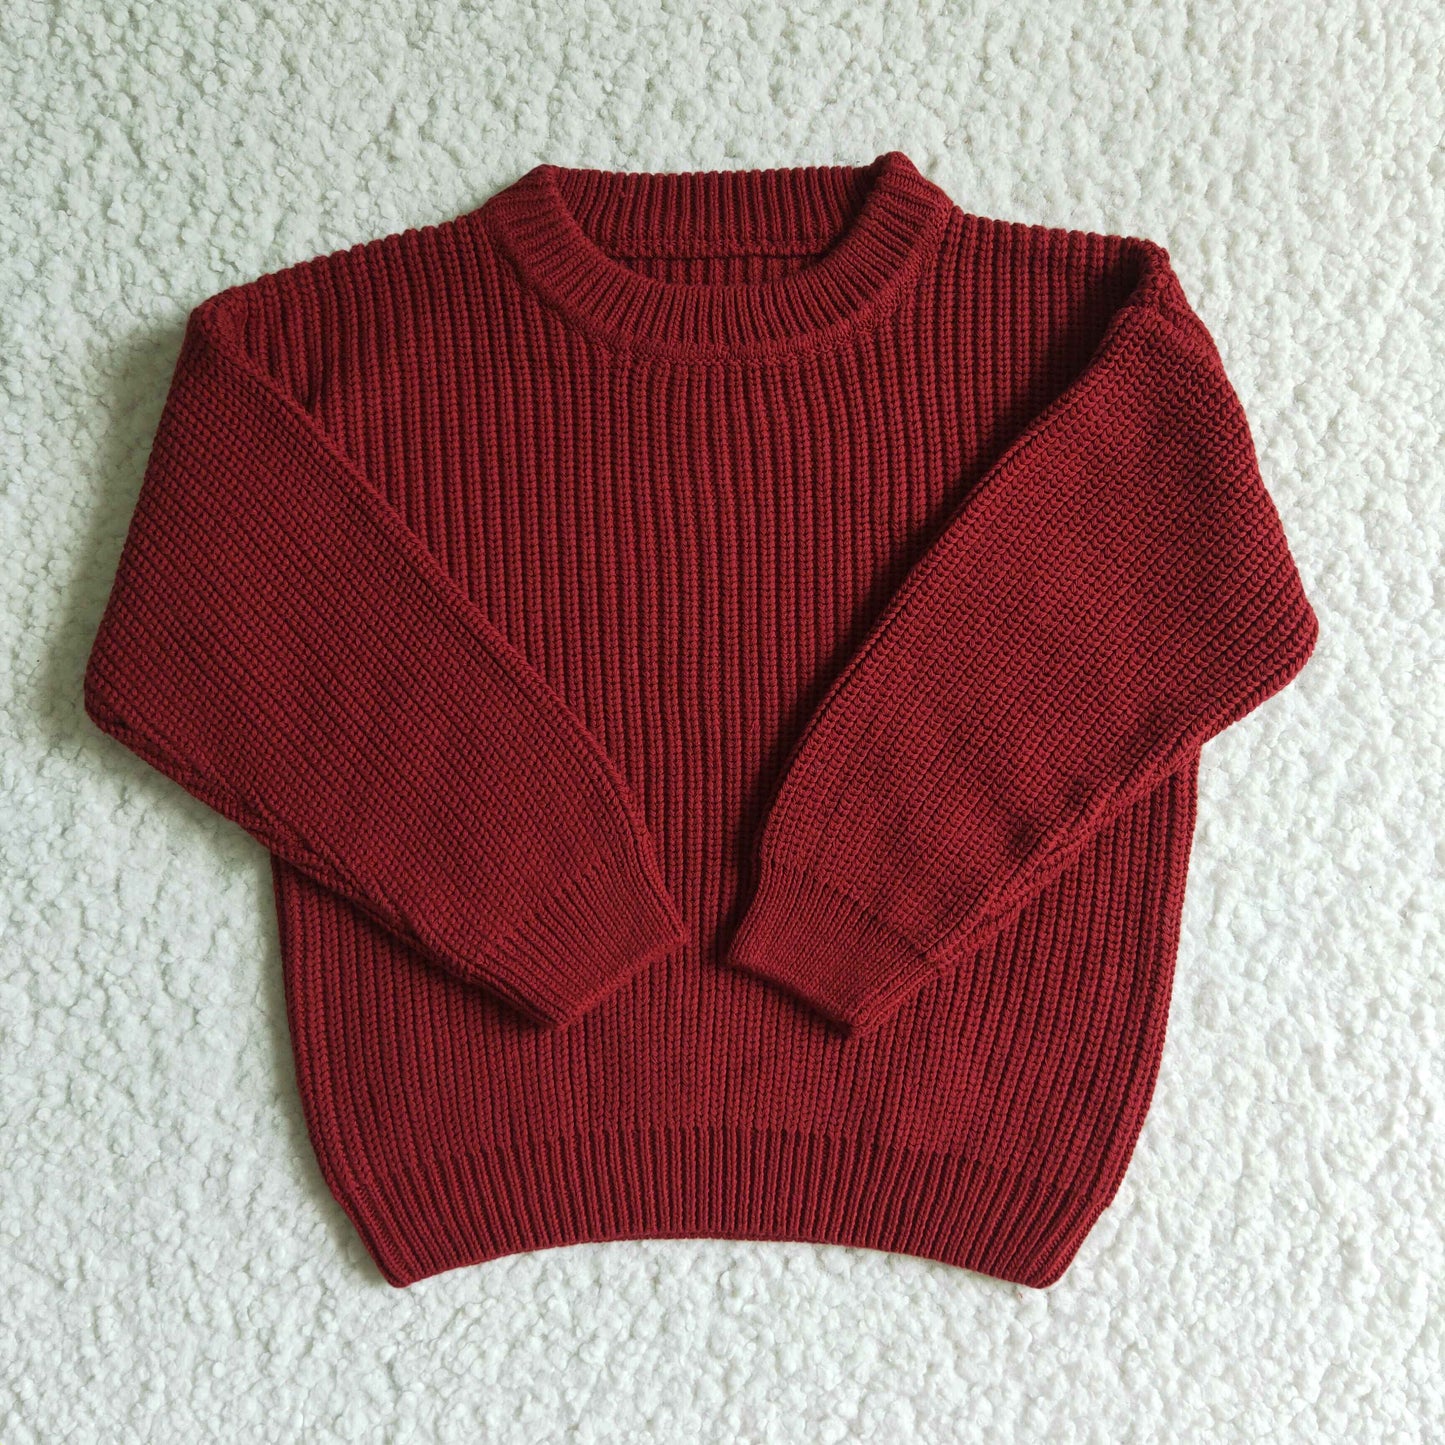 GT0030 Navy Knit Sweater For Kids